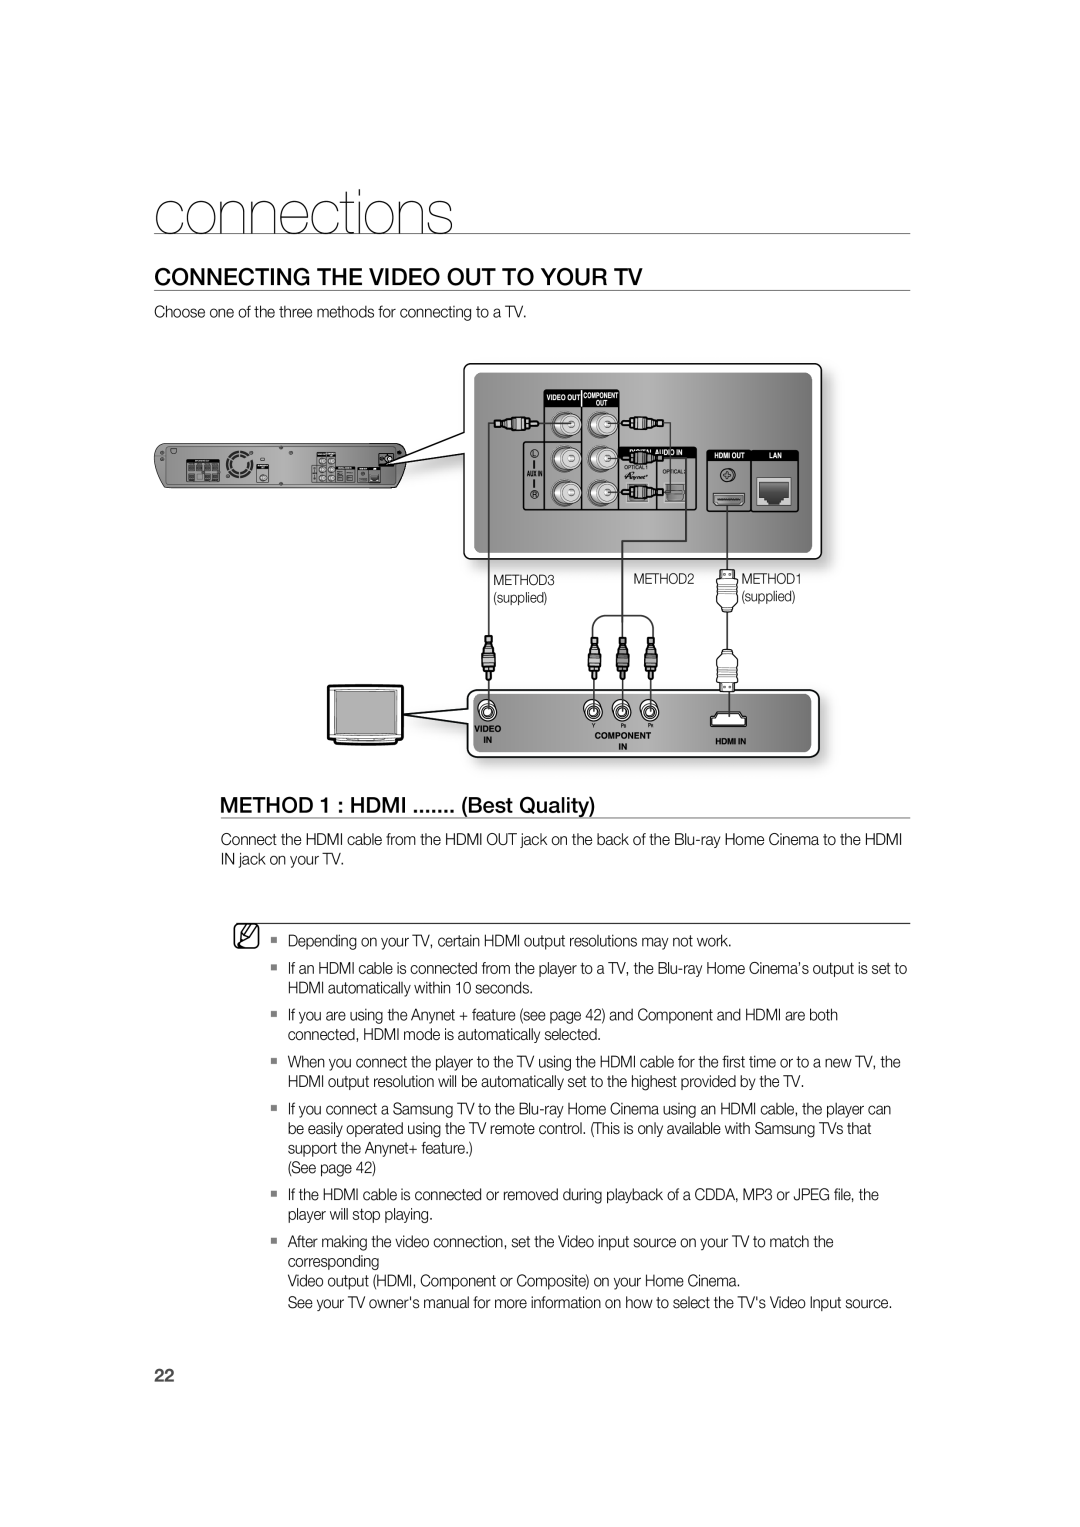 Samsung AH68-02019K manual Connecting The Video Out To Your Tv, METHOD 1 : HDMI, Best Quality, connections 